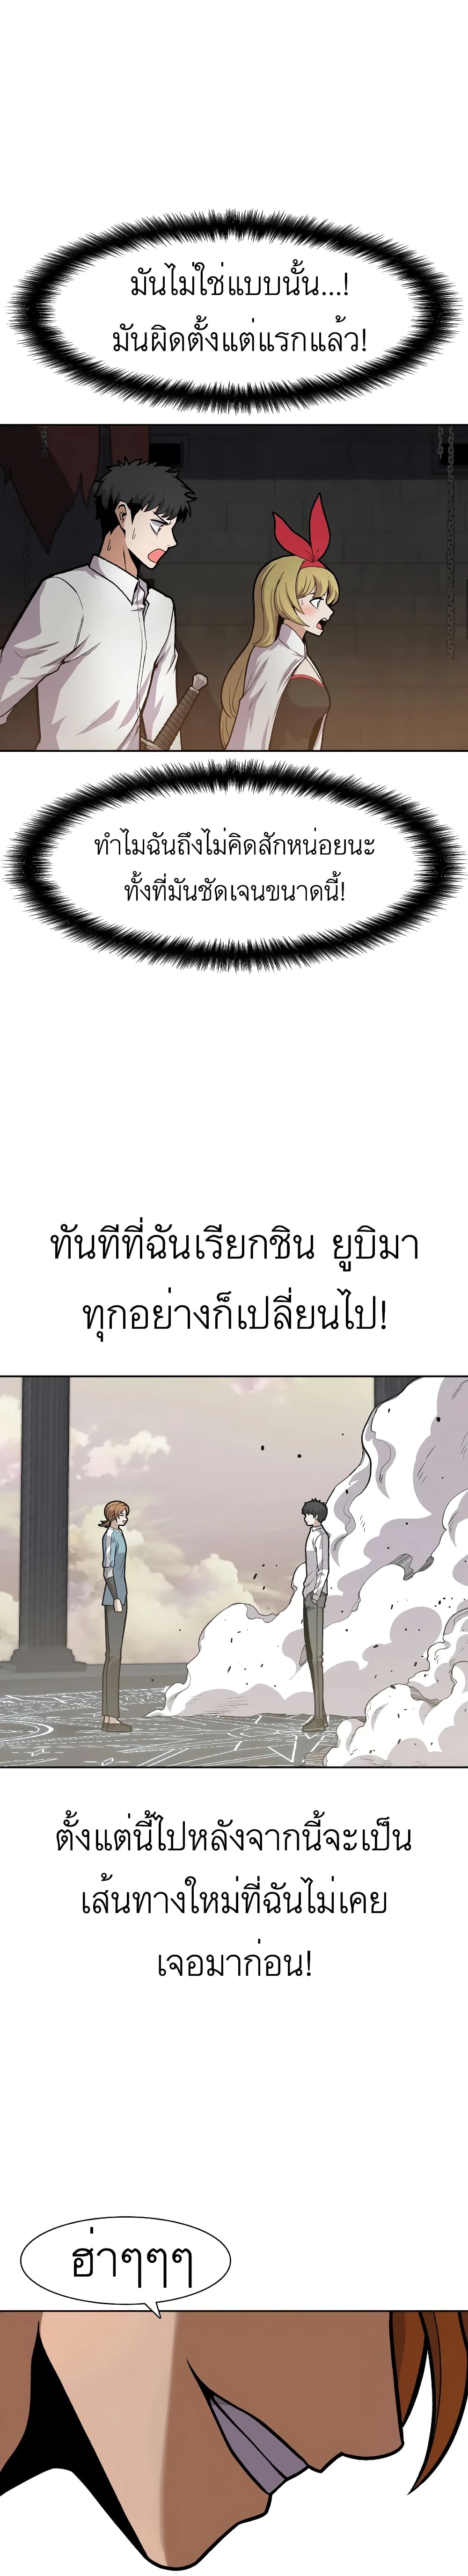 Raising Newbie Heroes In Another World ตอนที่ 7 (32)